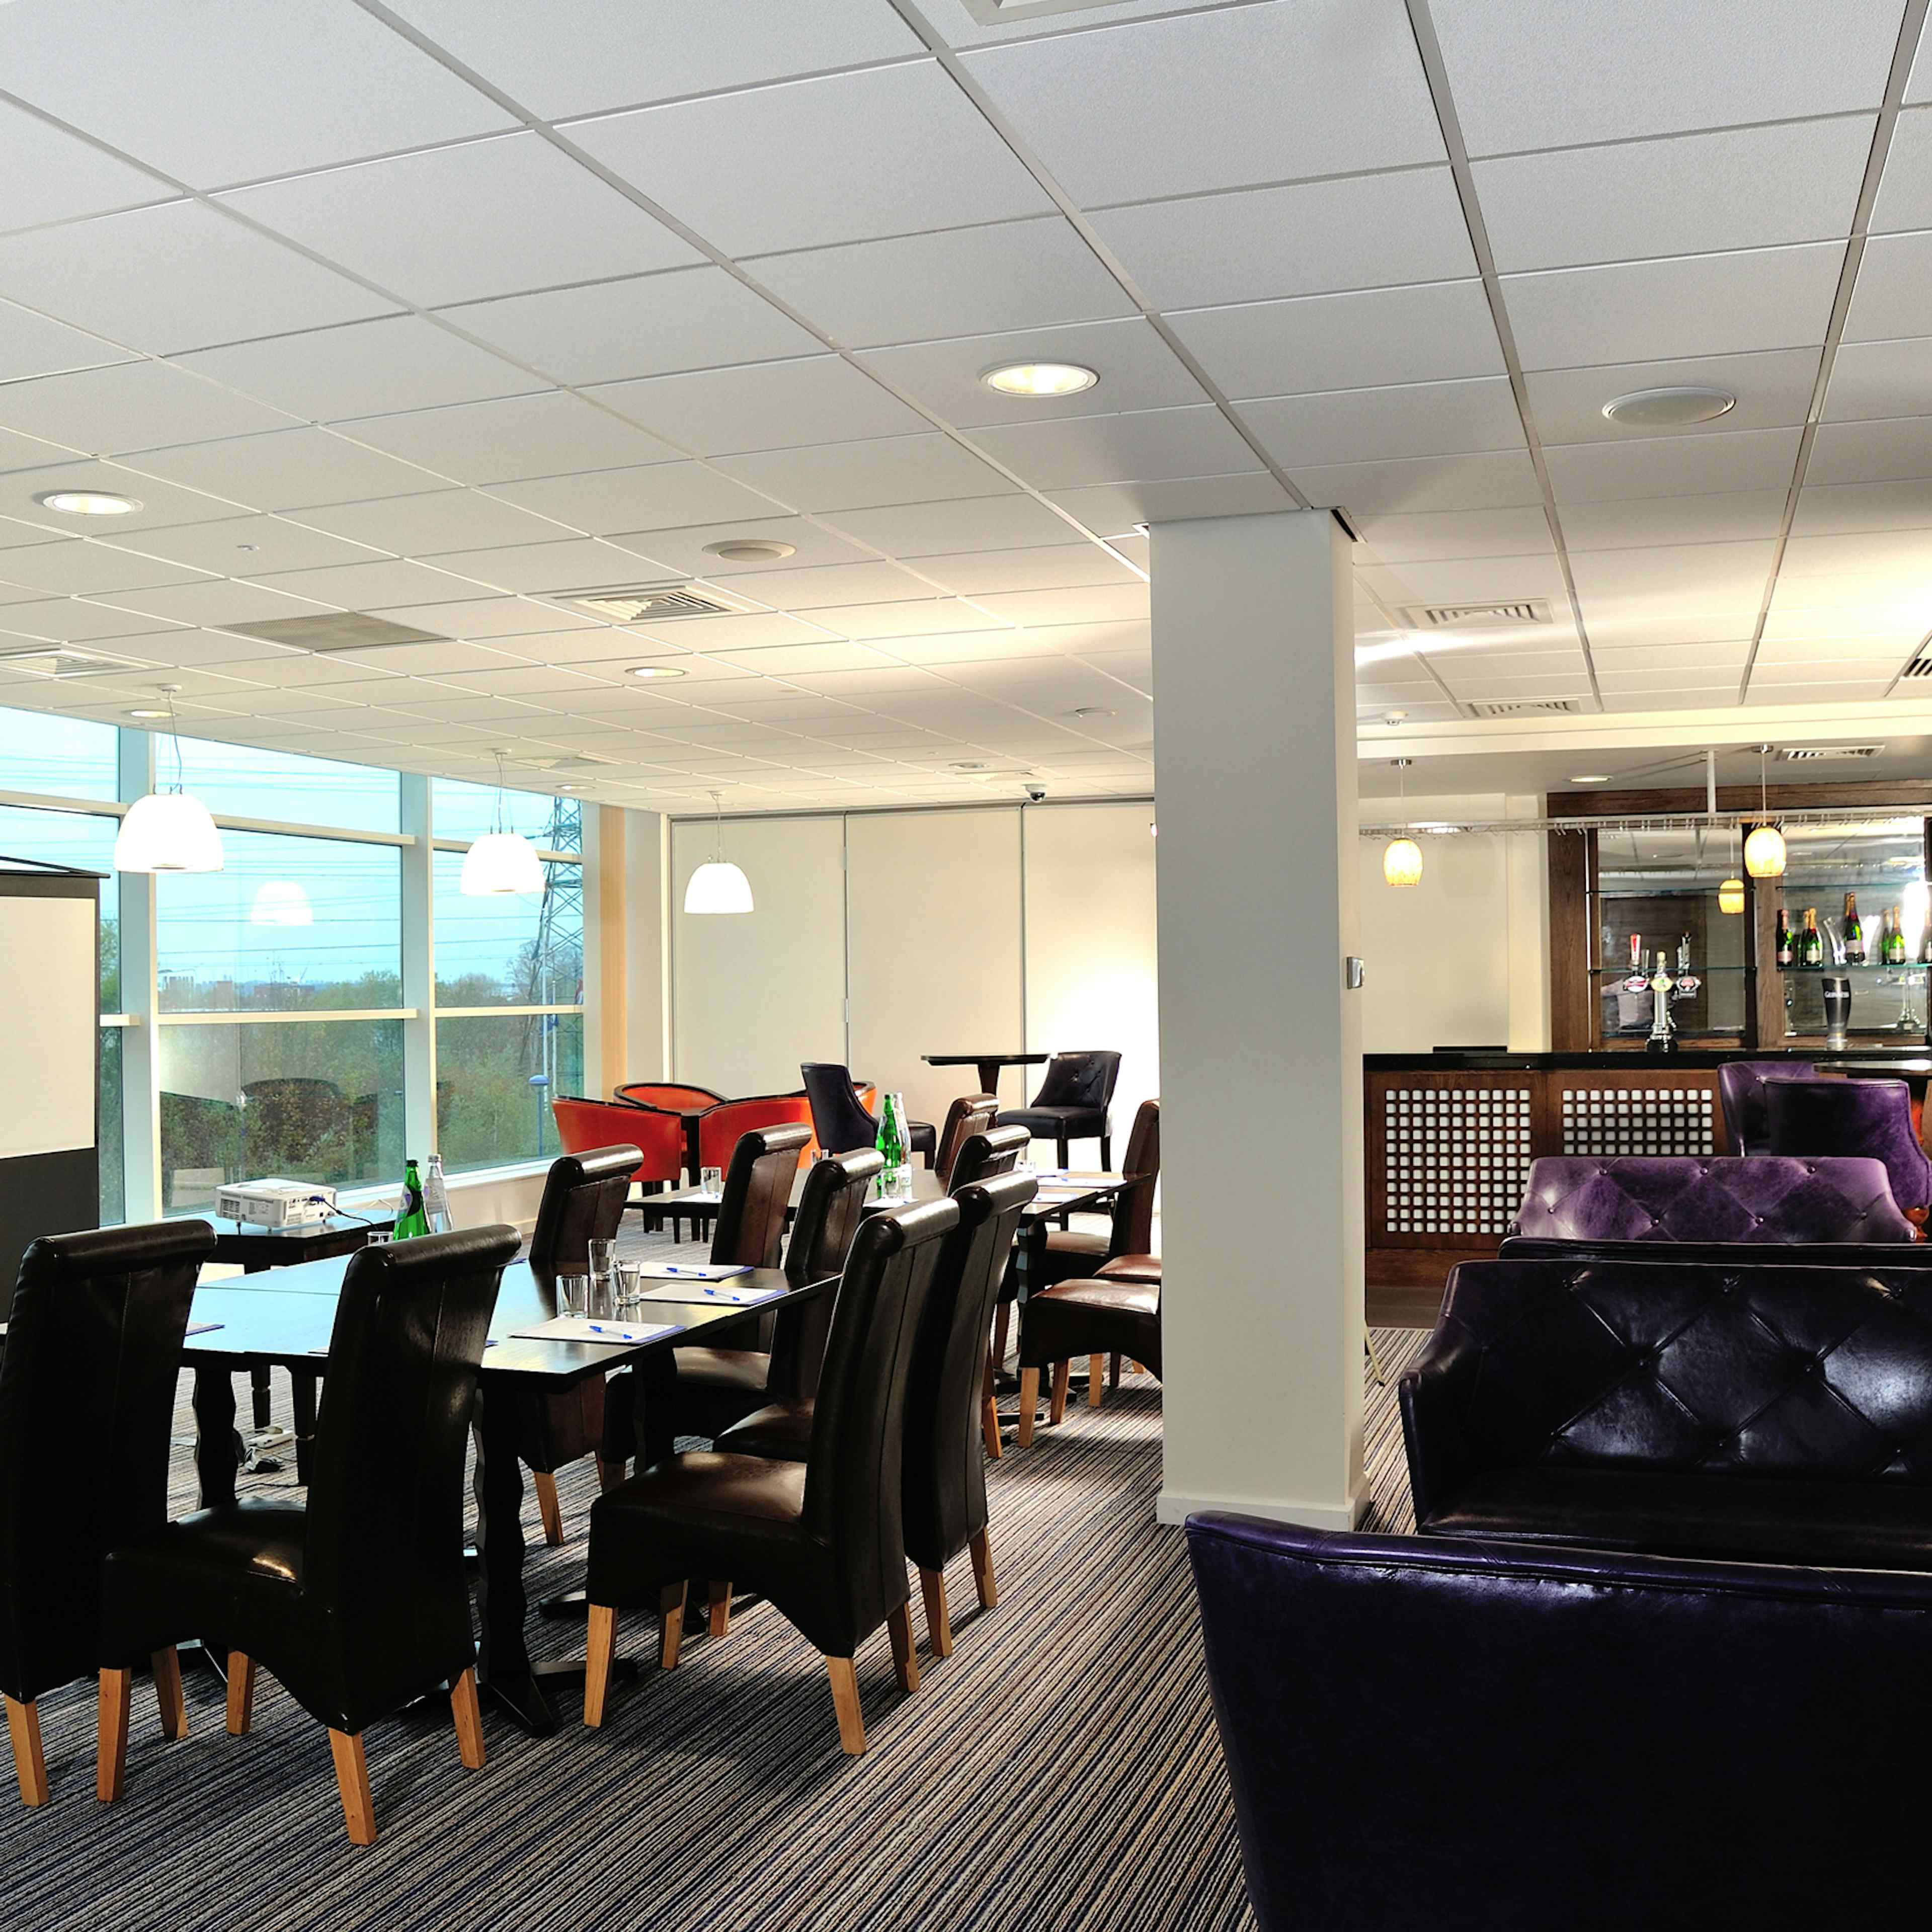 Leicester City Football Club - Premier Lounge image 1